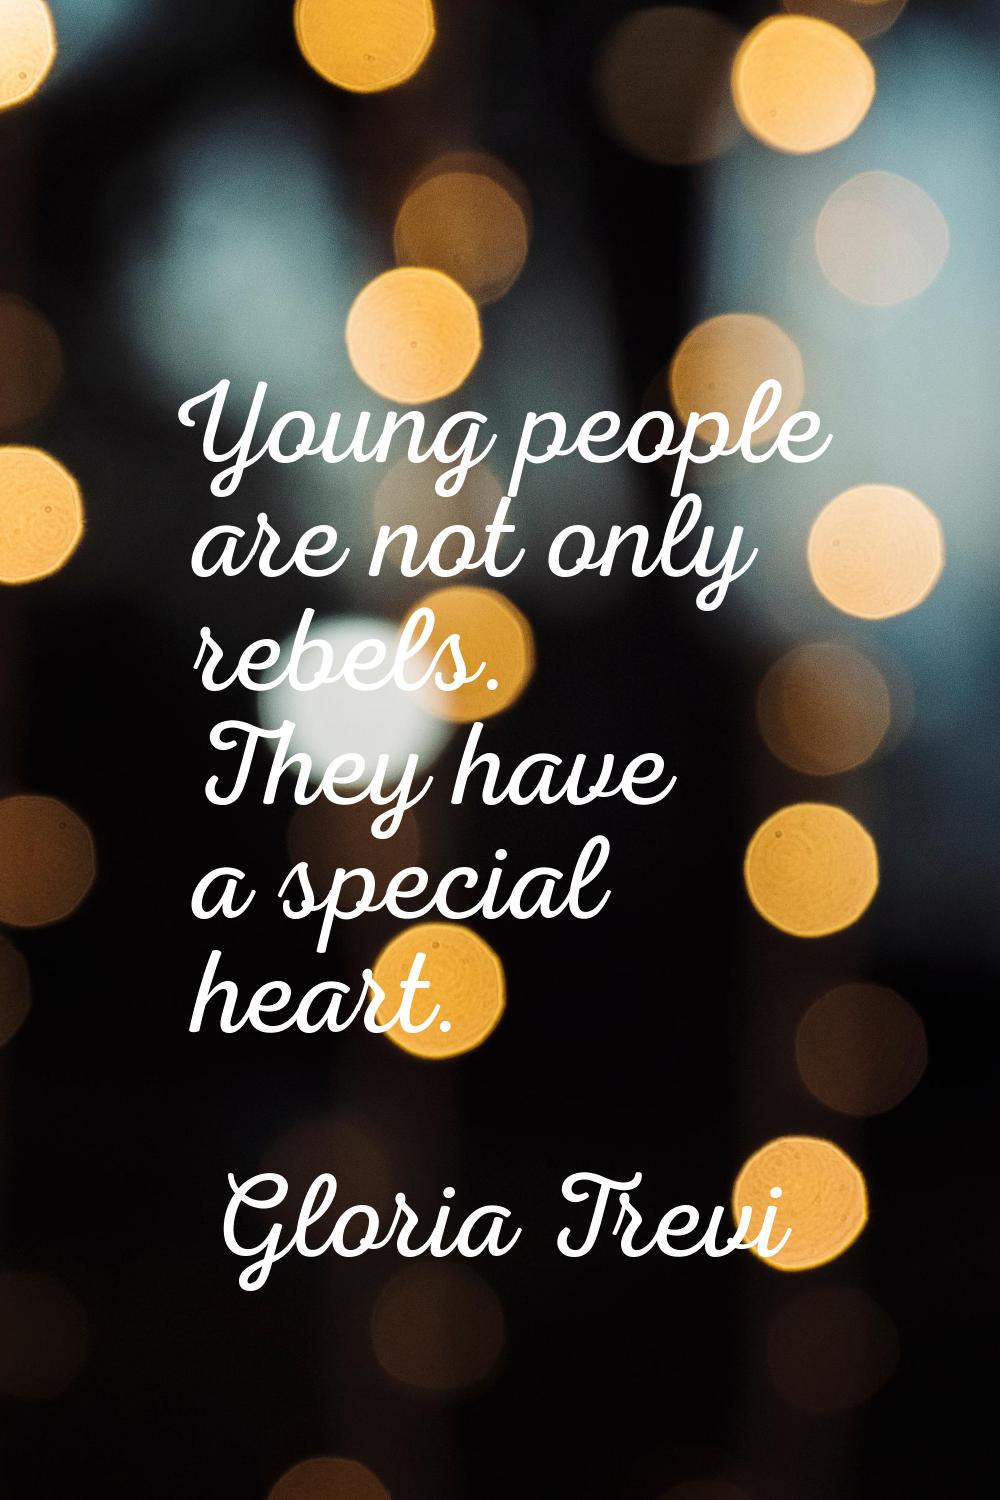 Young people are not only rebels. They have a special heart.